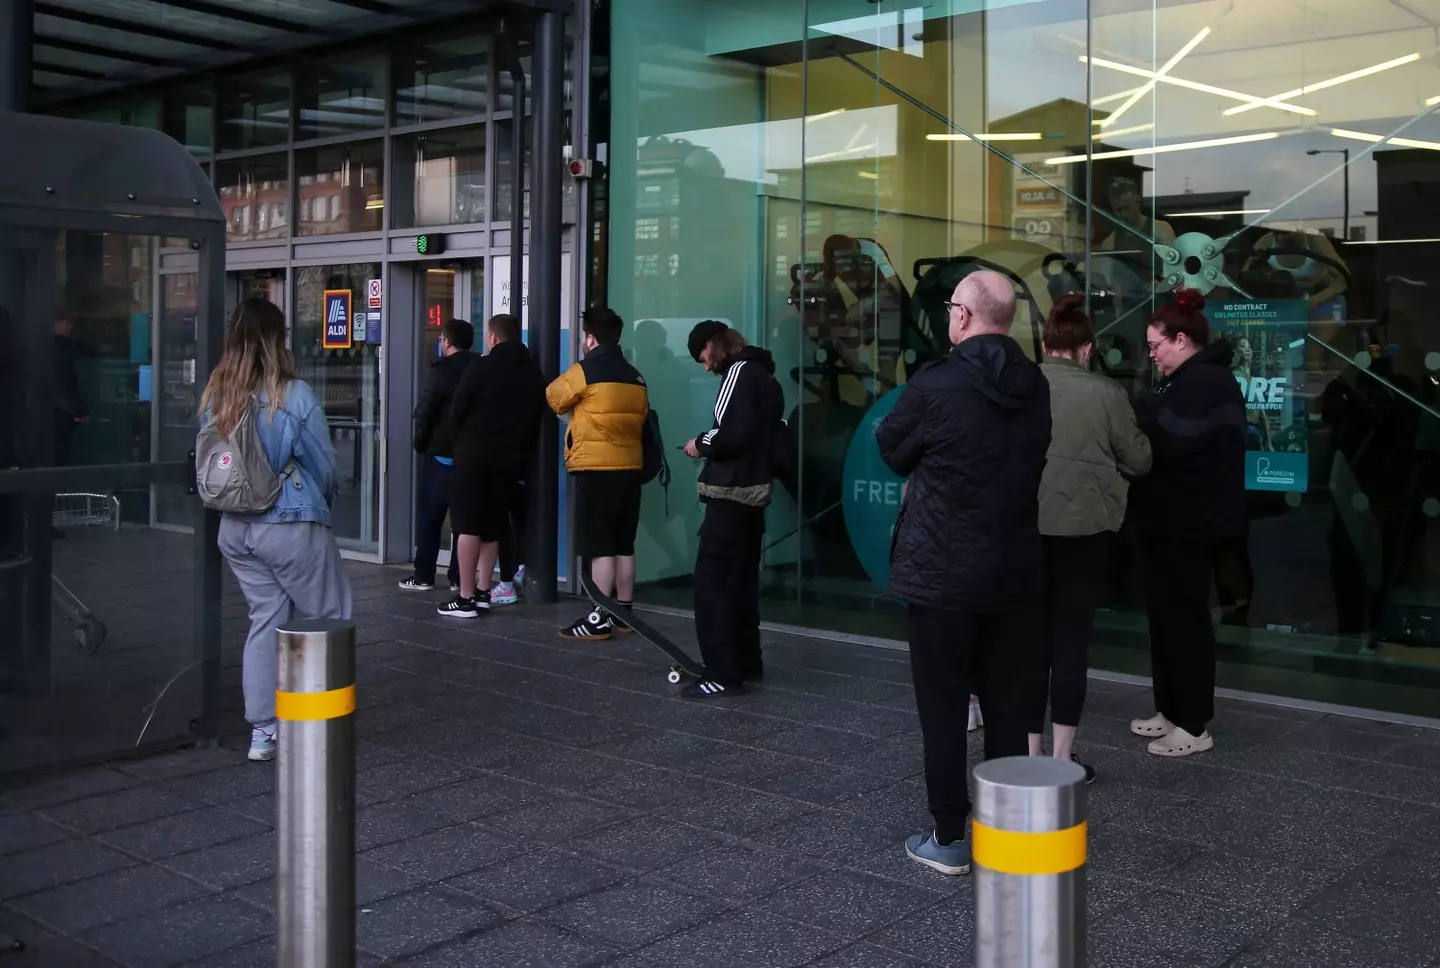 People were queuing outside Aldi stores yesterday (18 April) morning to get some Prime.